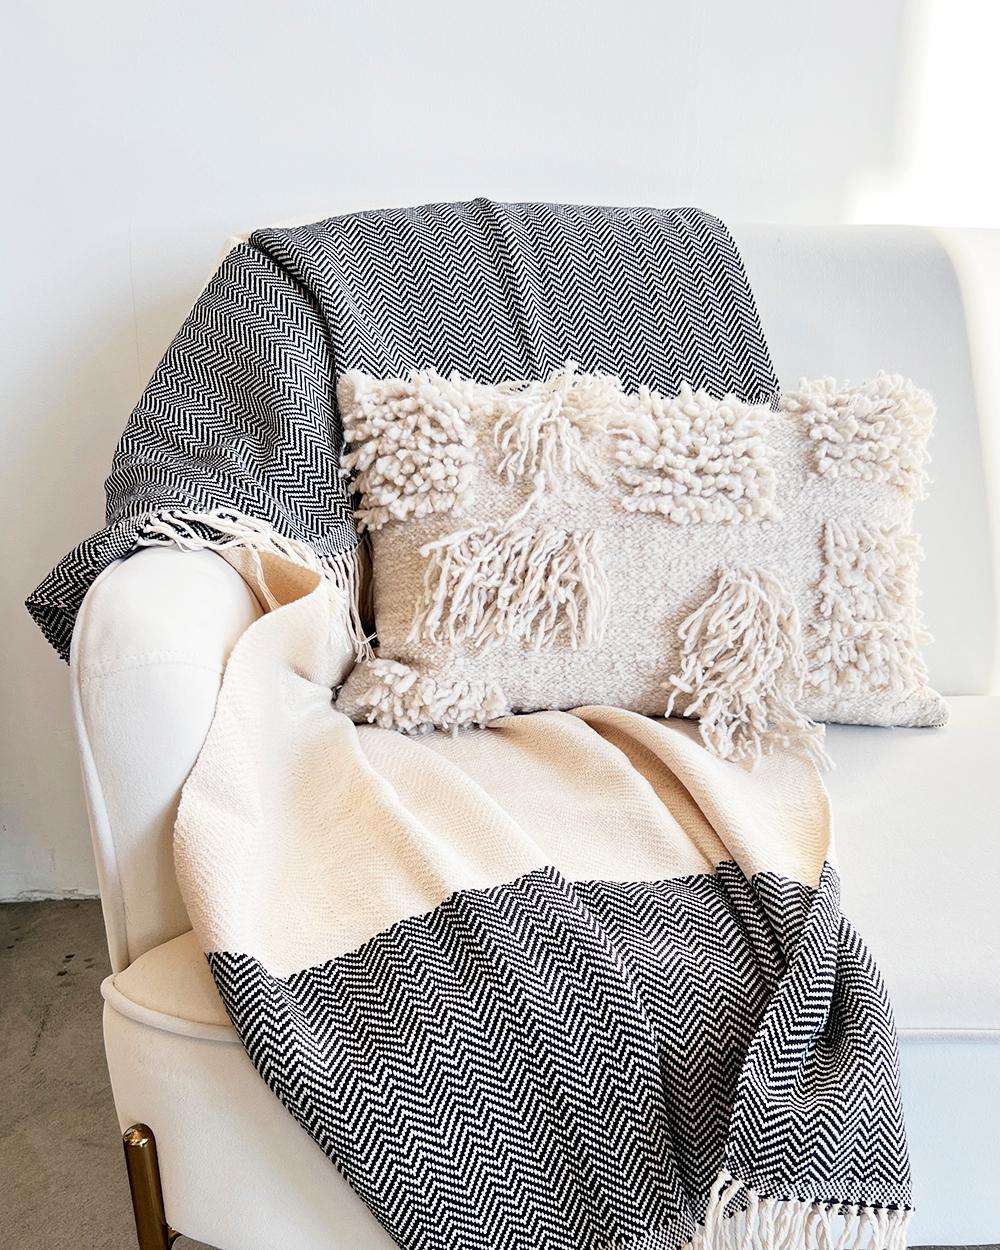 A crisp cotton throw for your home
This Amano Throw offers an organic cotton blend that is handmade with expert precision. Perfect for adding a crisp and clean look to any bedroom or living room, its herringbone hem design smartly mingles modern and